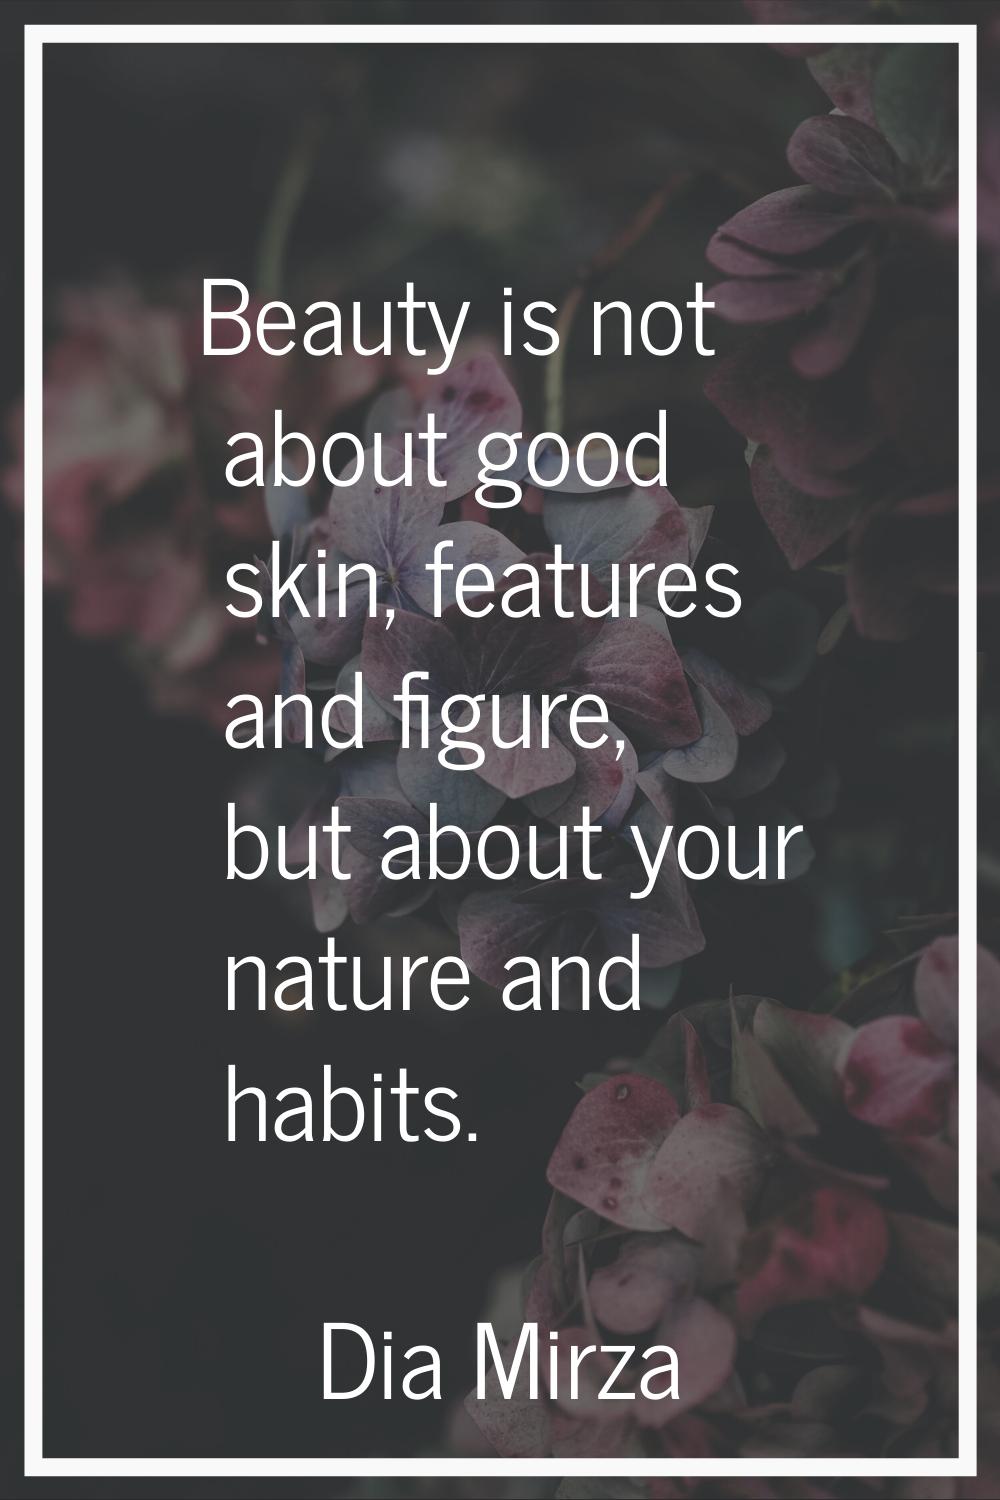 Beauty is not about good skin, features and figure, but about your nature and habits.